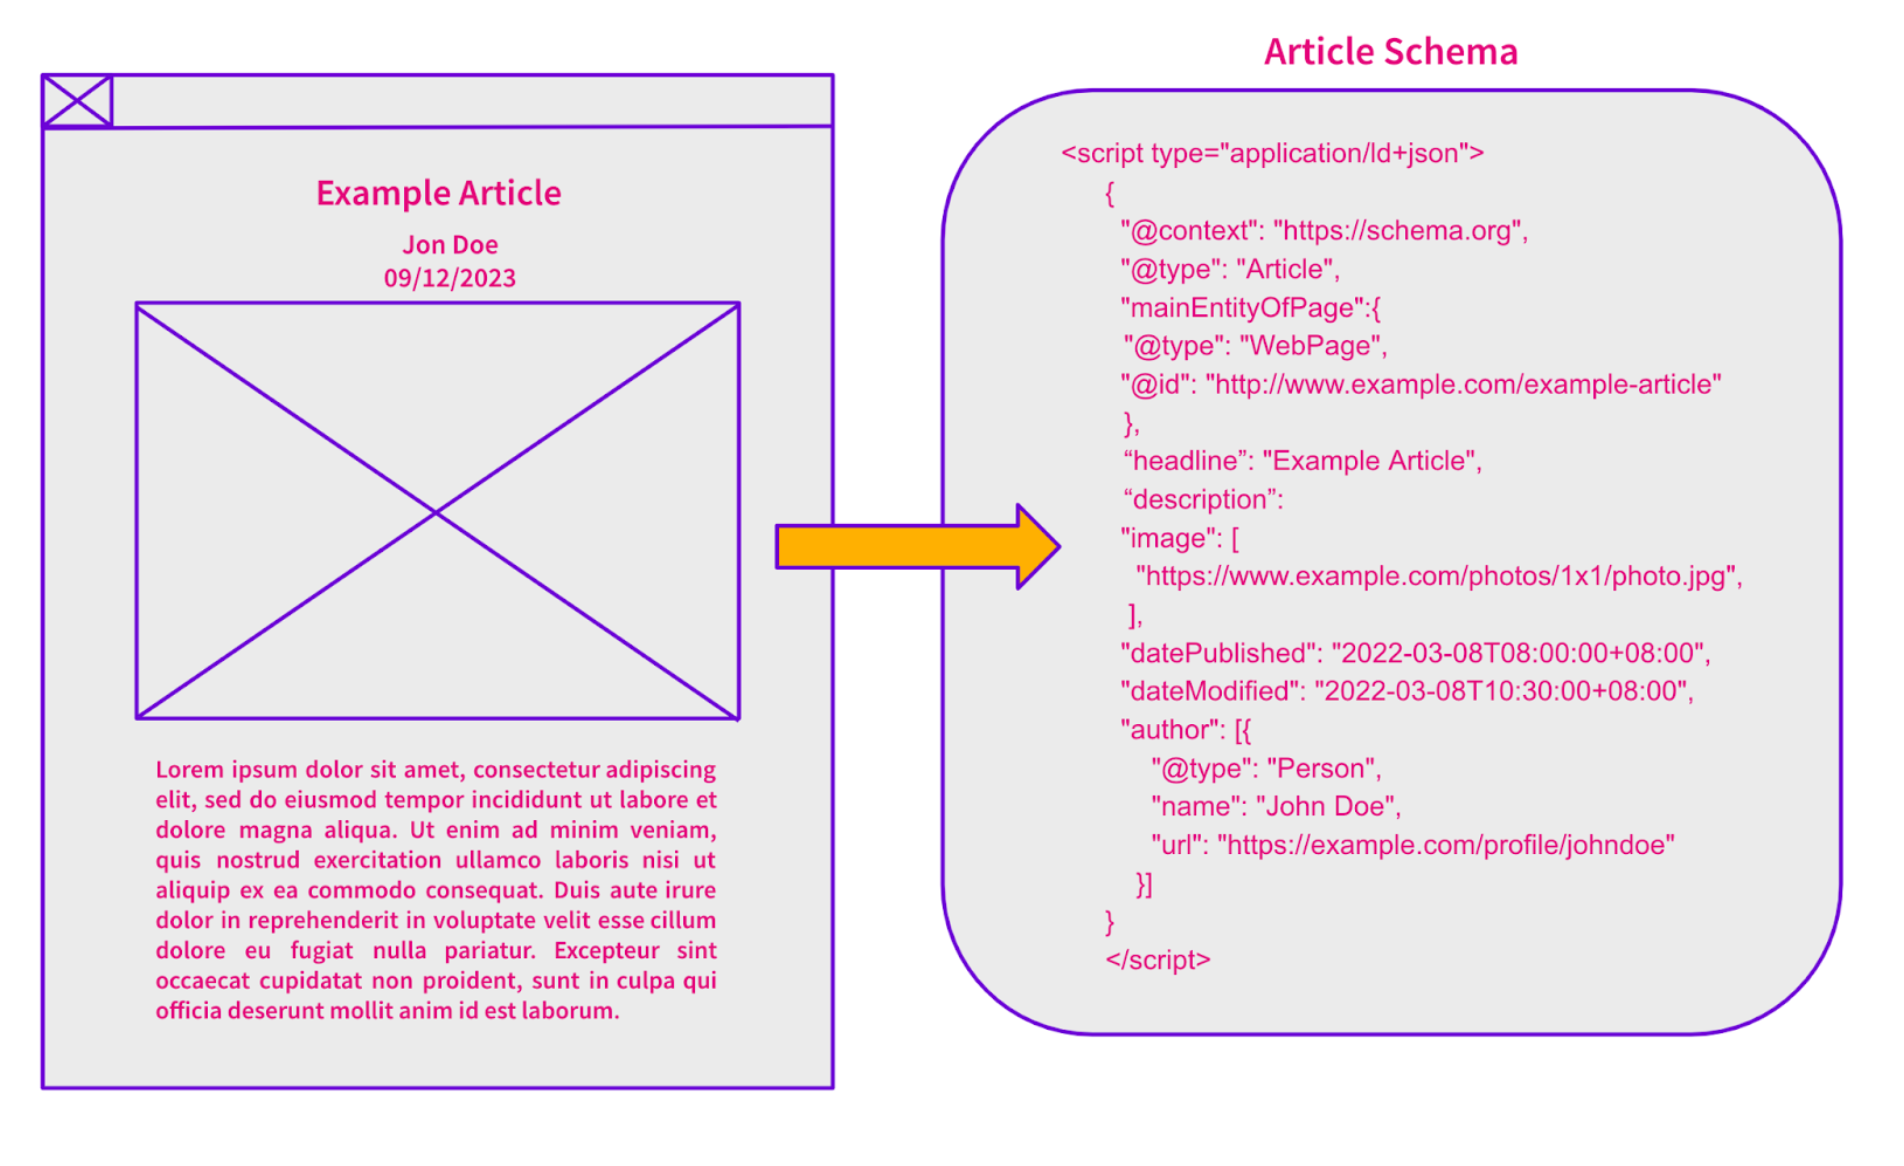 Does adding article schema to blog article pages help improve organic traffic?